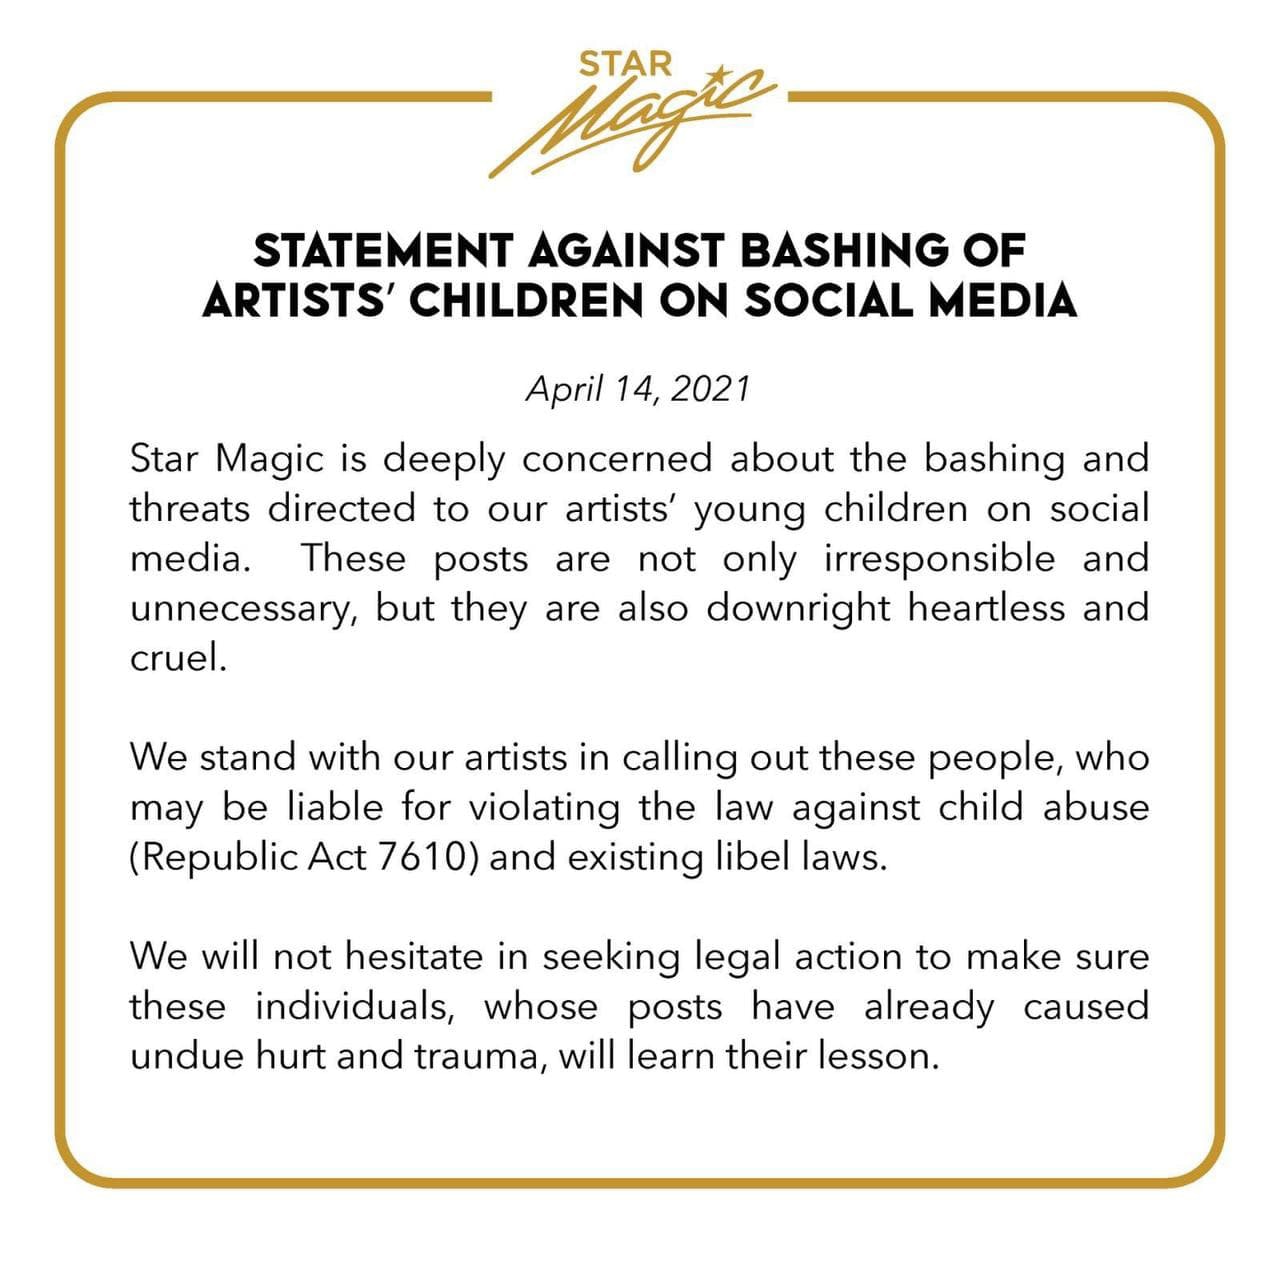 Star Magic deeply concerned about bashing of talents&#39; young children 1